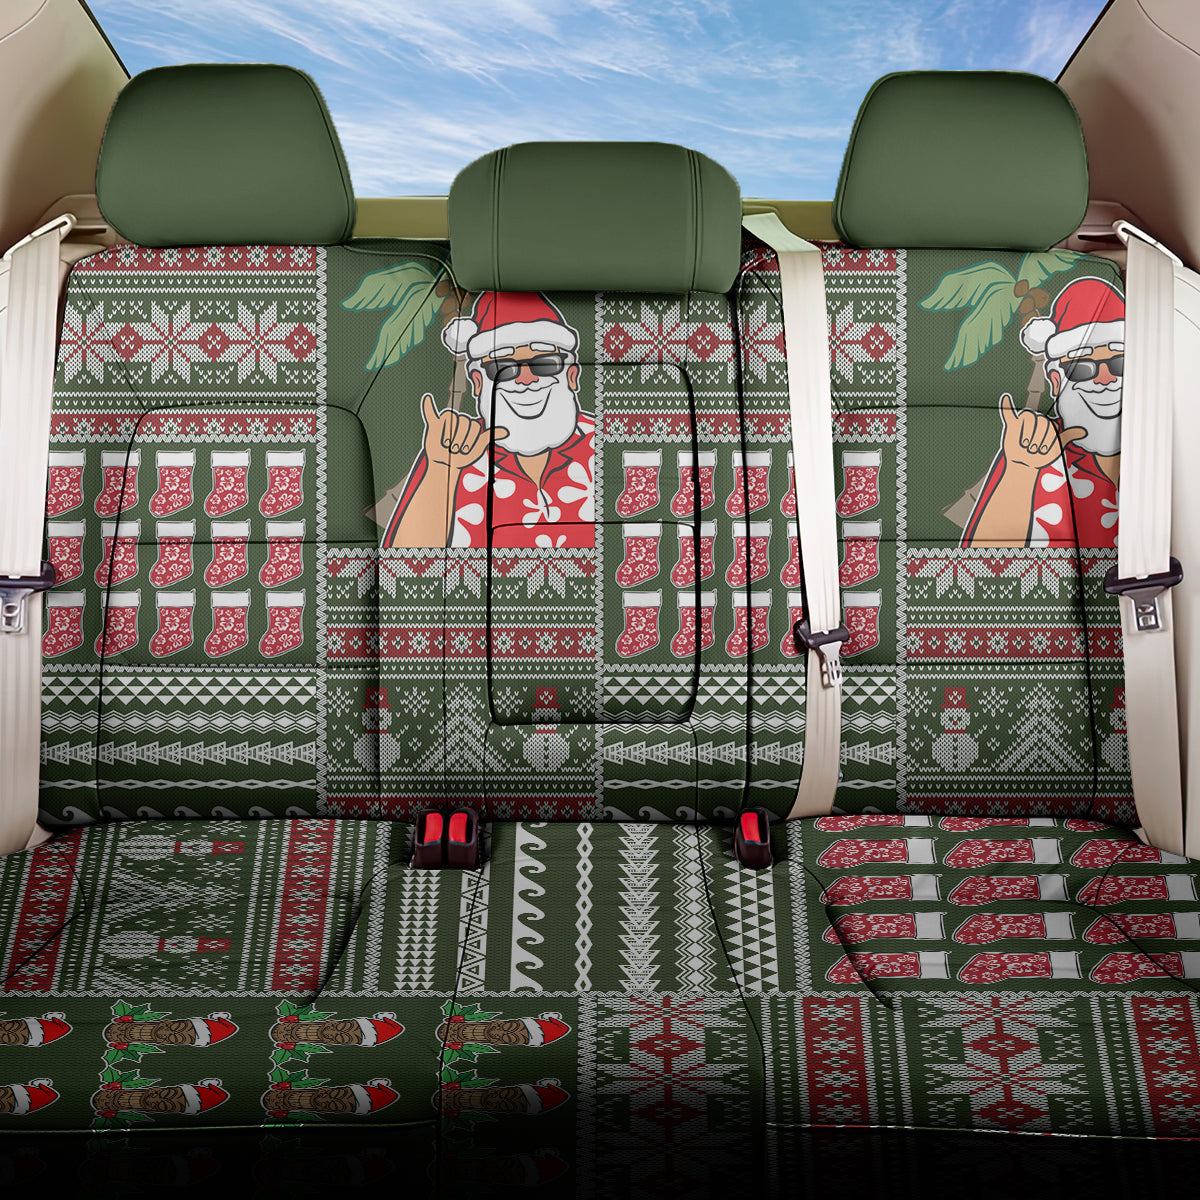 Hawaii Mele Kalikimaka Back Car Seat Cover Aloha and Christmas Elements Patchwork Green Style LT03 One Size Green - Polynesian Pride